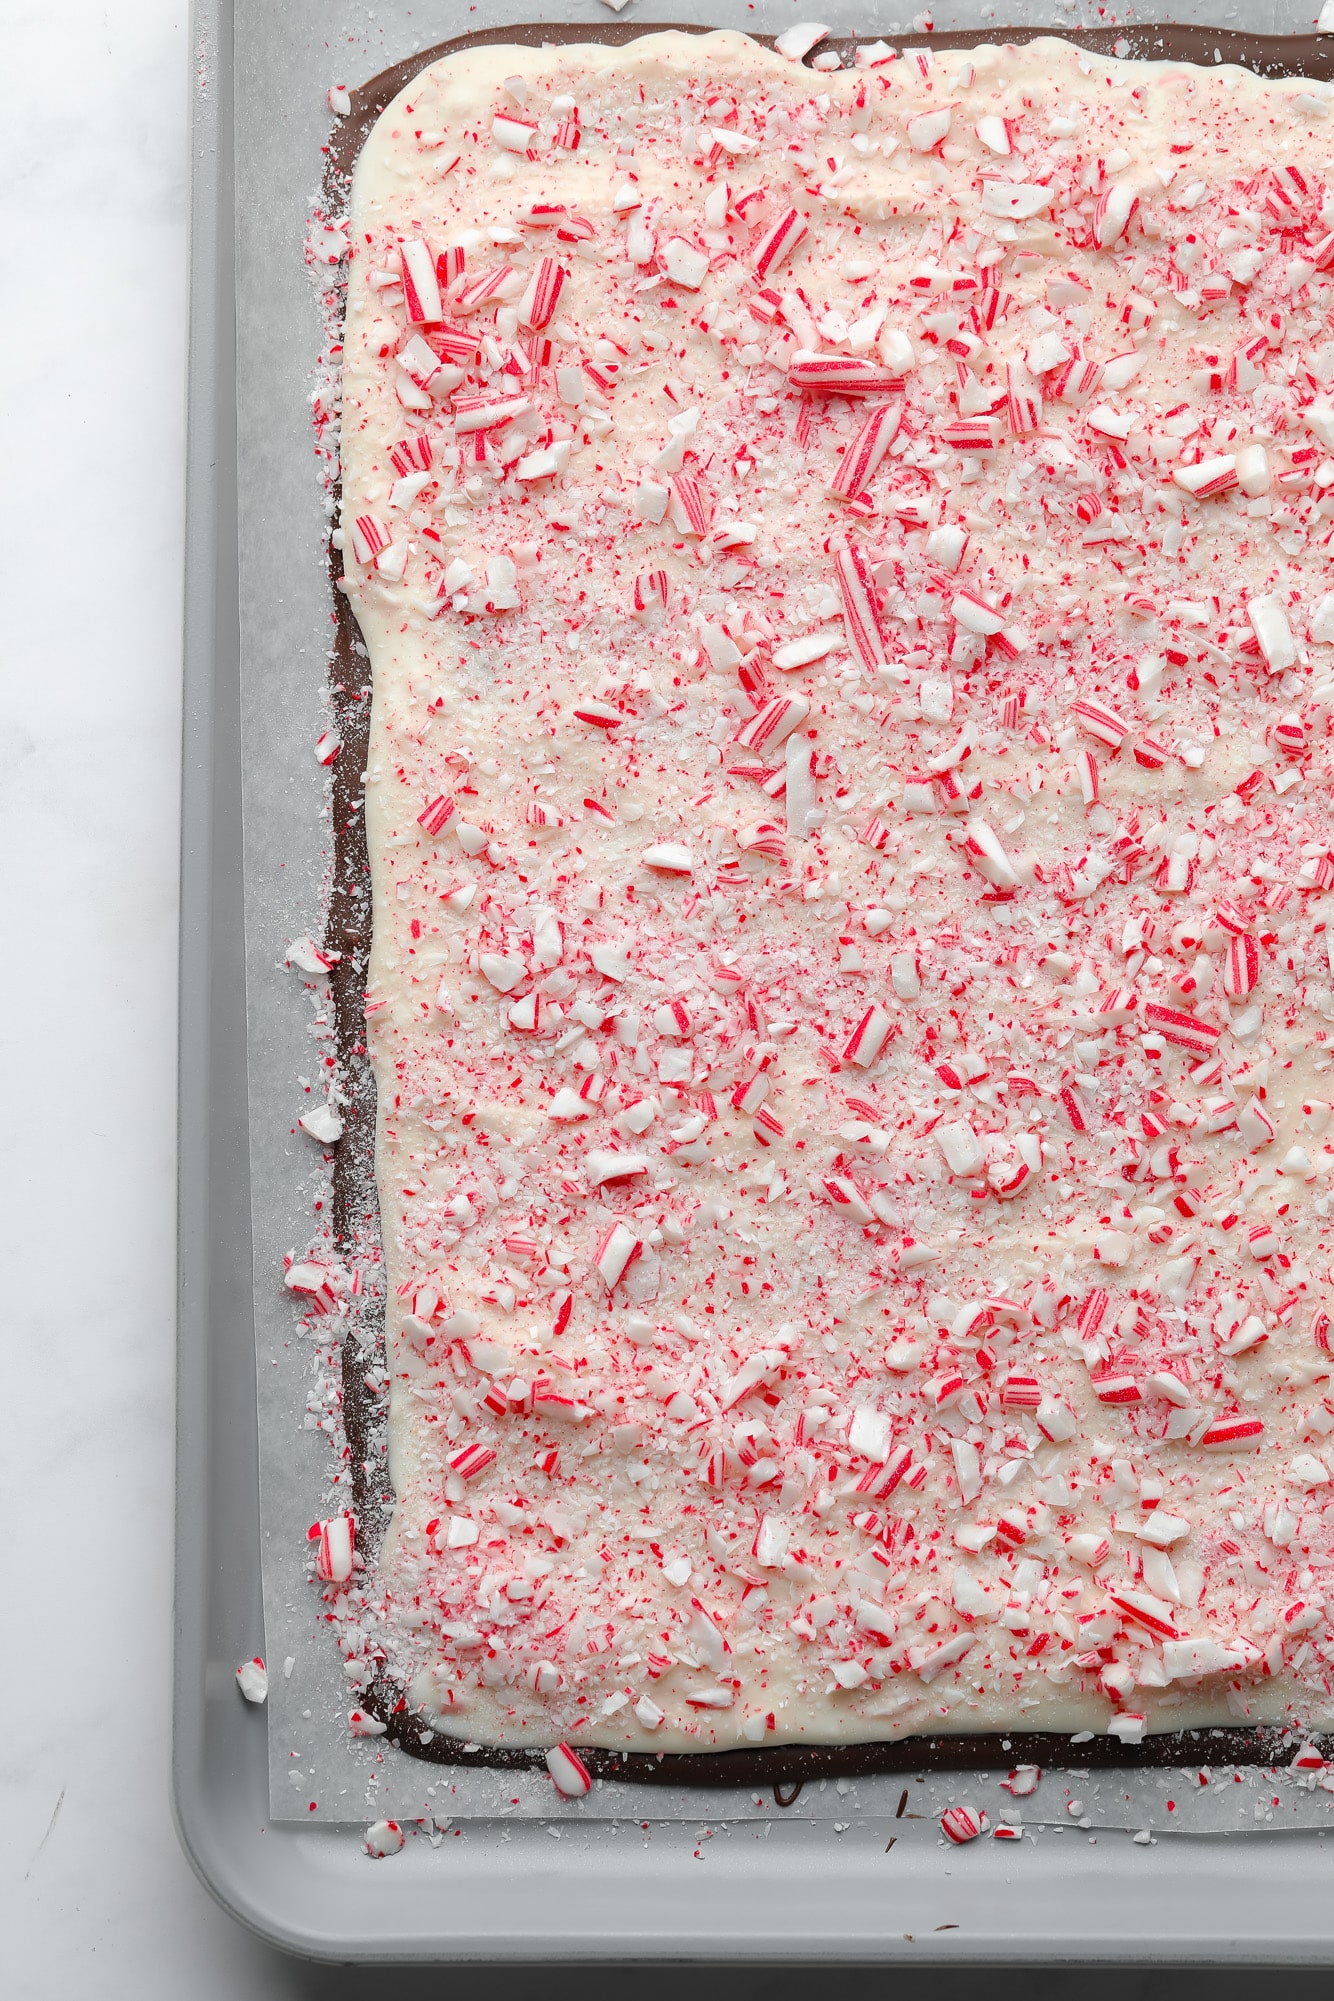 vegan peppermint bark topped with crushed candy canes on a parchment-lined baking sheet.